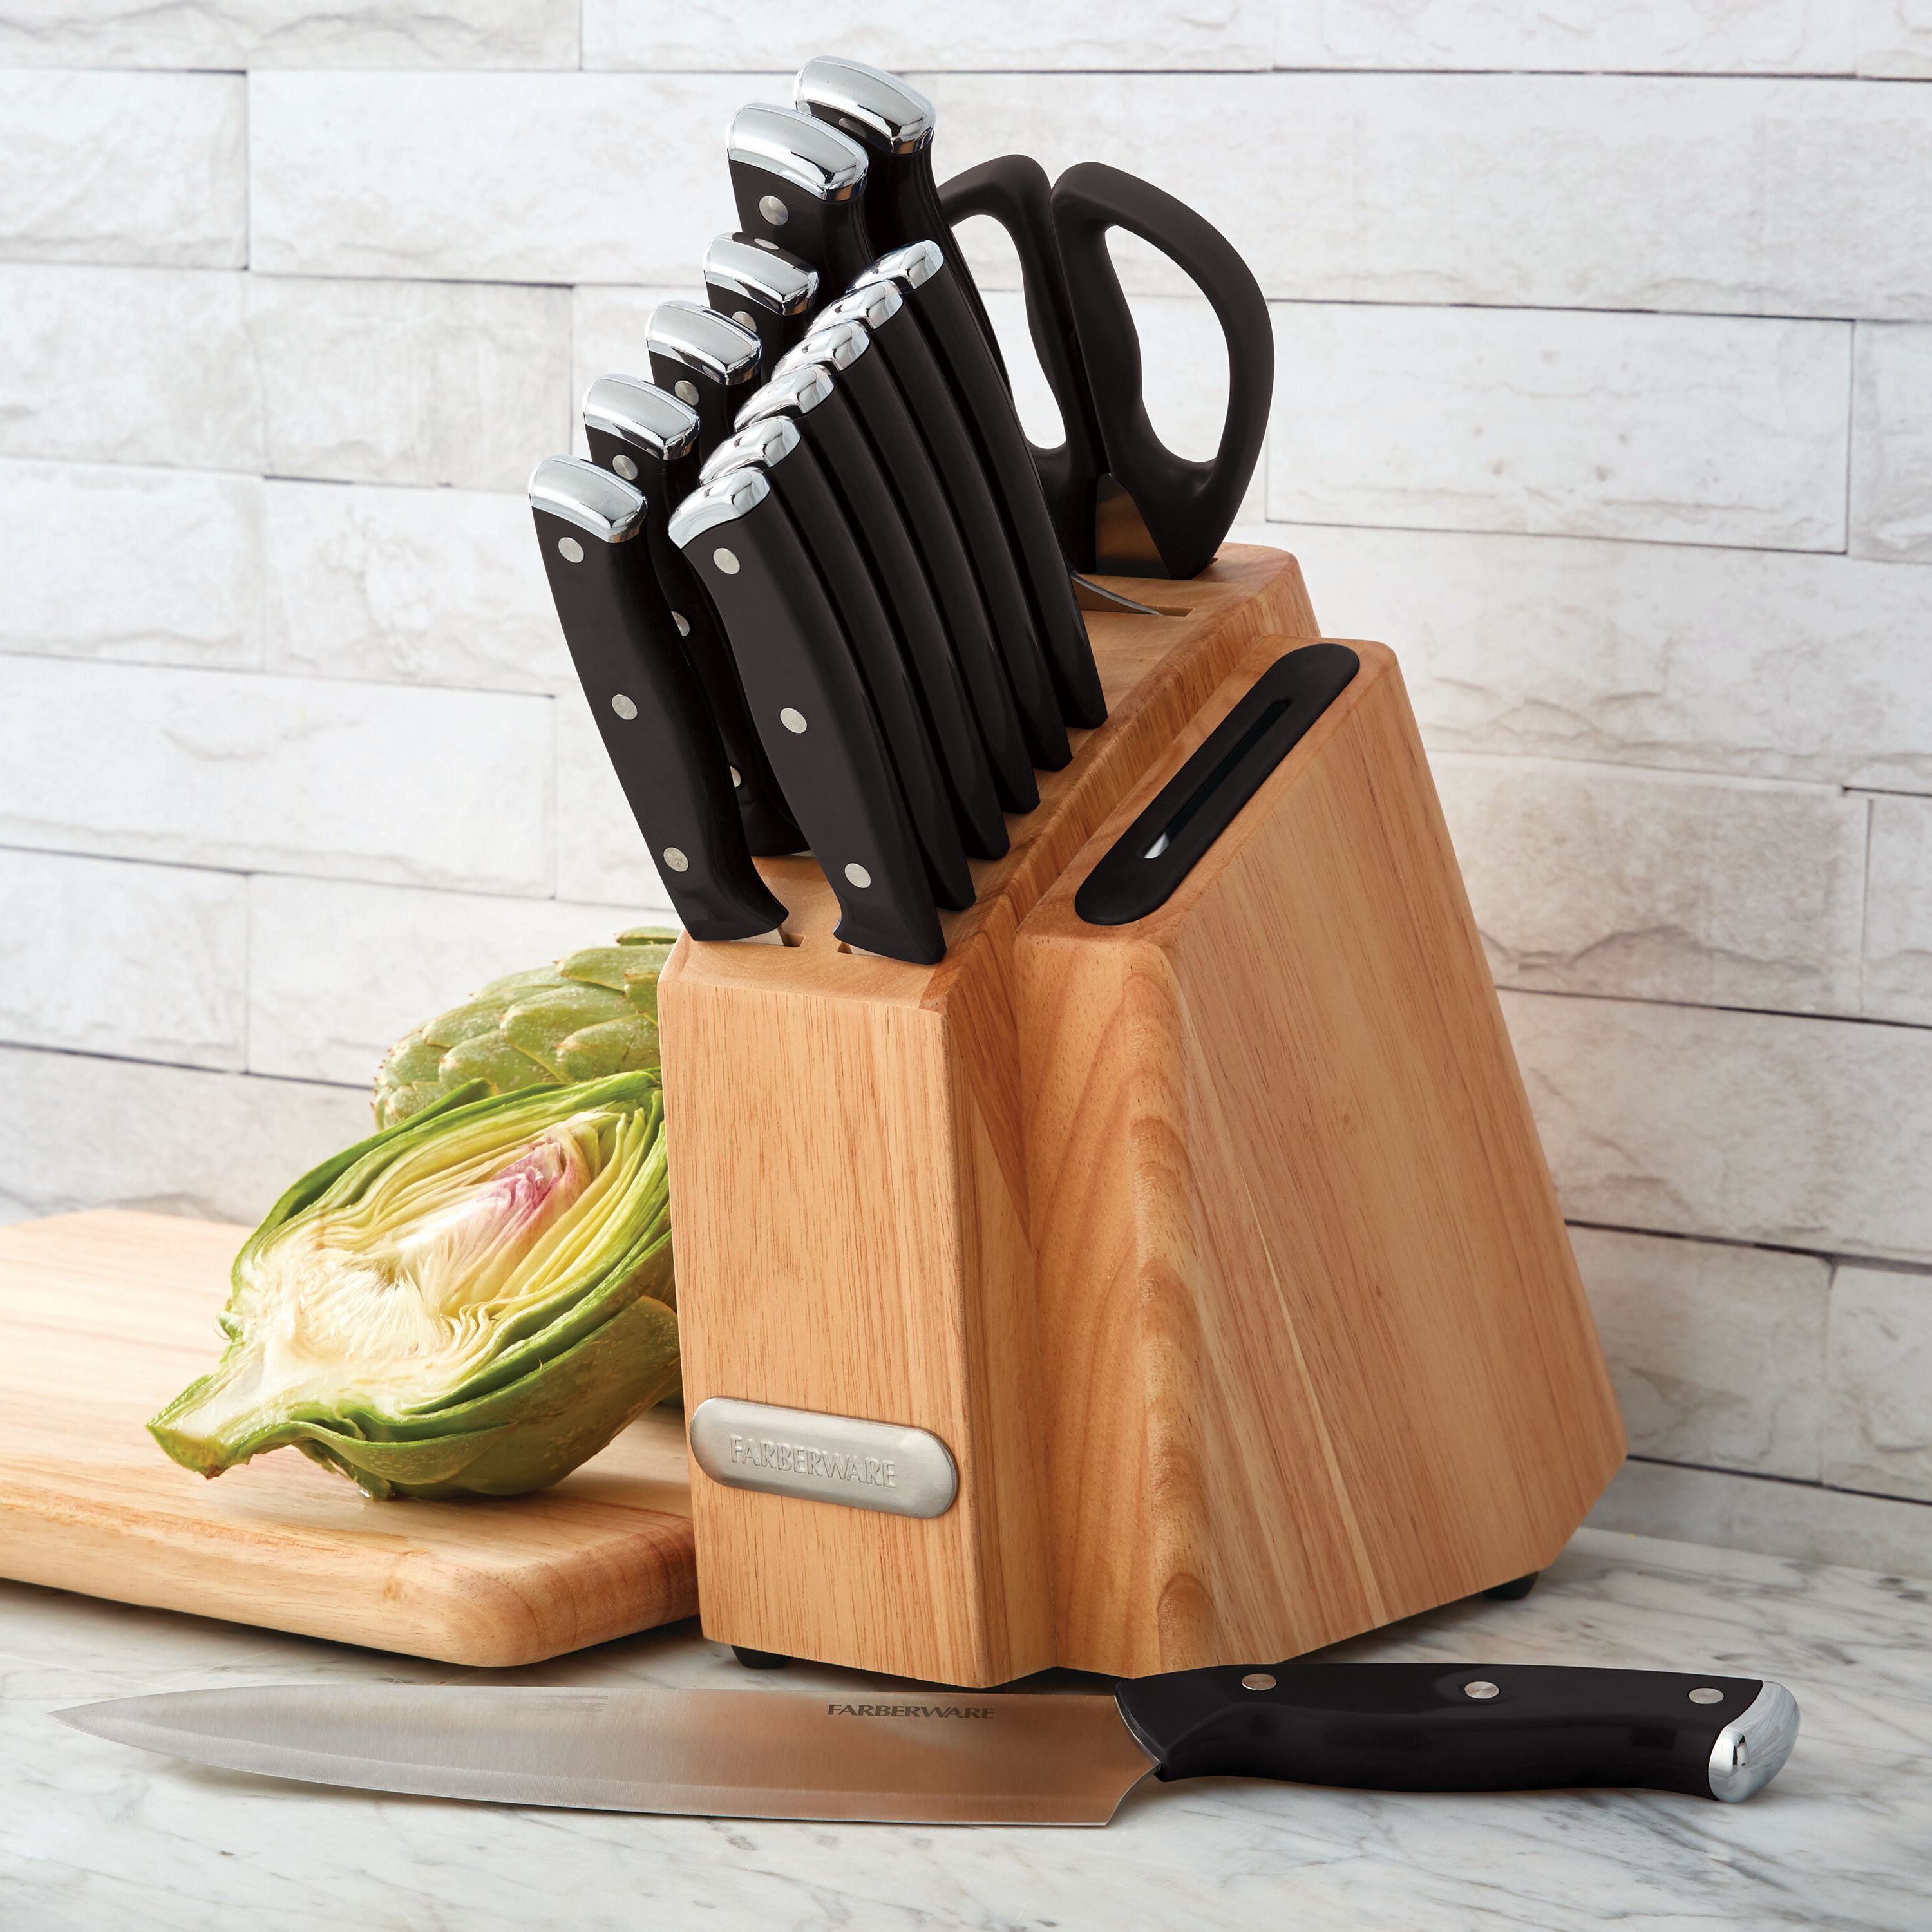 Old Homestead 5 Knives 7 pc set with Butcher Block Cutlery